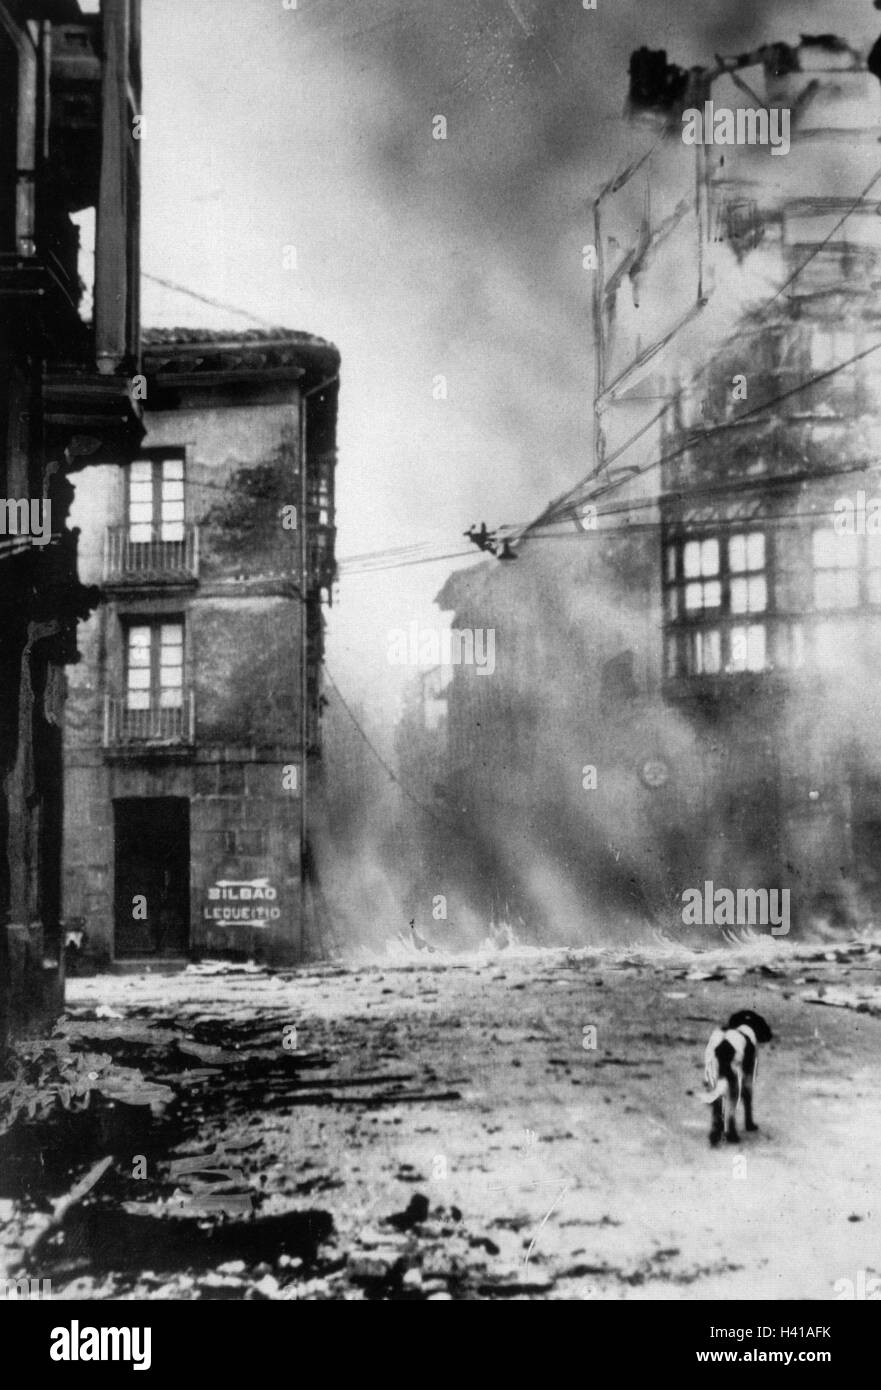 BOMBING OF GUERNICA, Spain,  26 April 1937. The town is 35 km from Bilbao  shown on the road sign Stock Photo